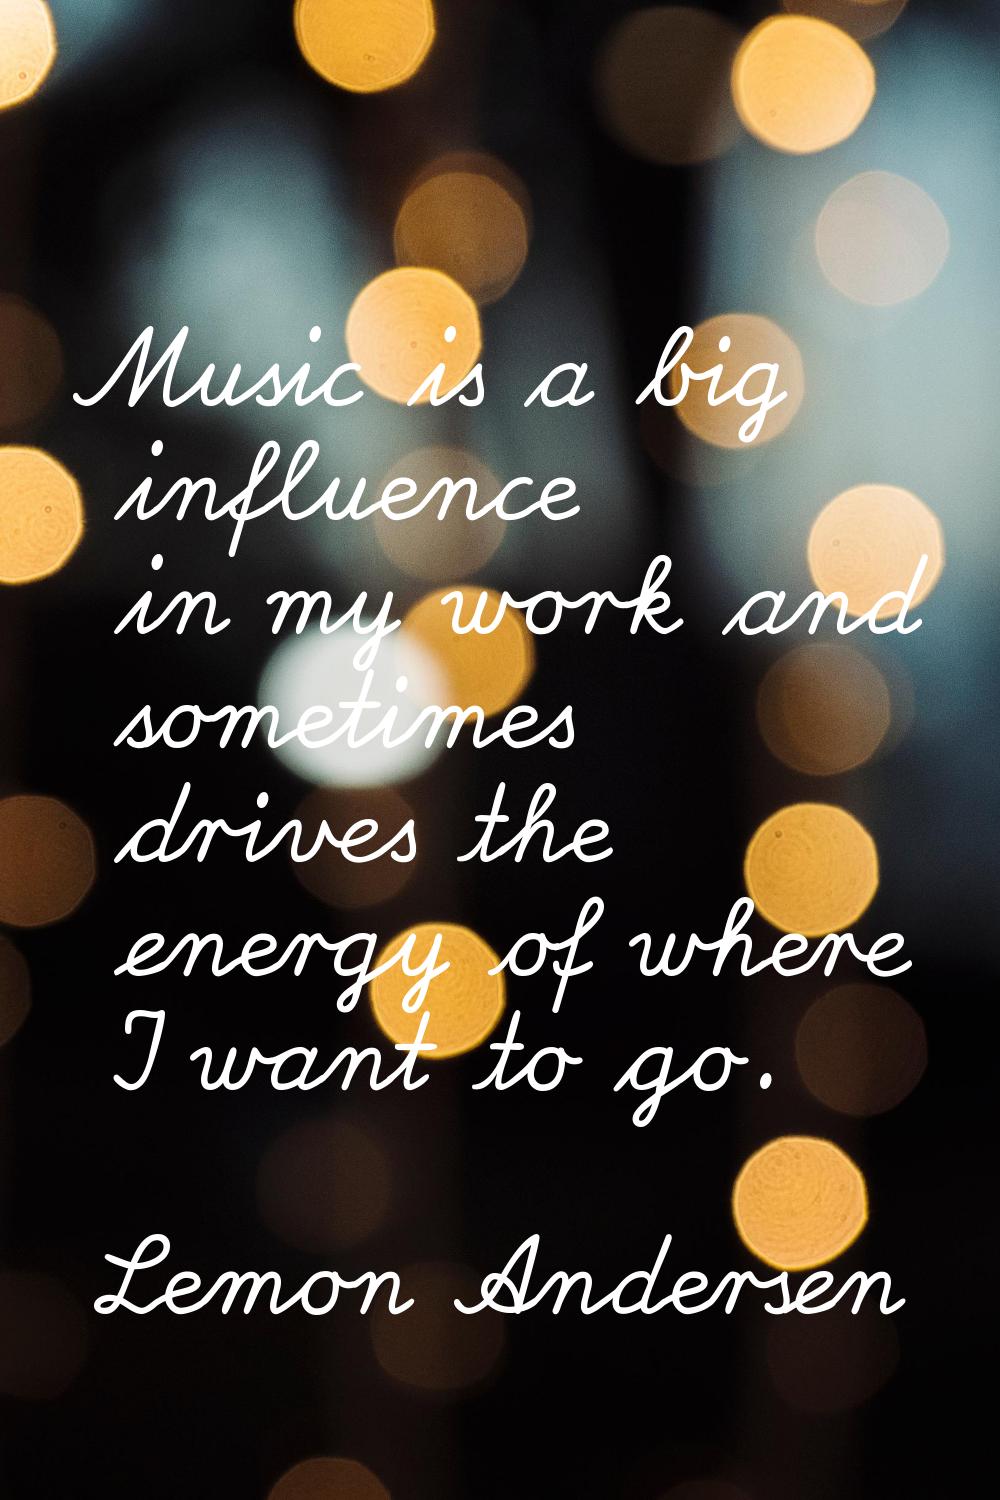 Music is a big influence in my work and sometimes drives the energy of where I want to go.